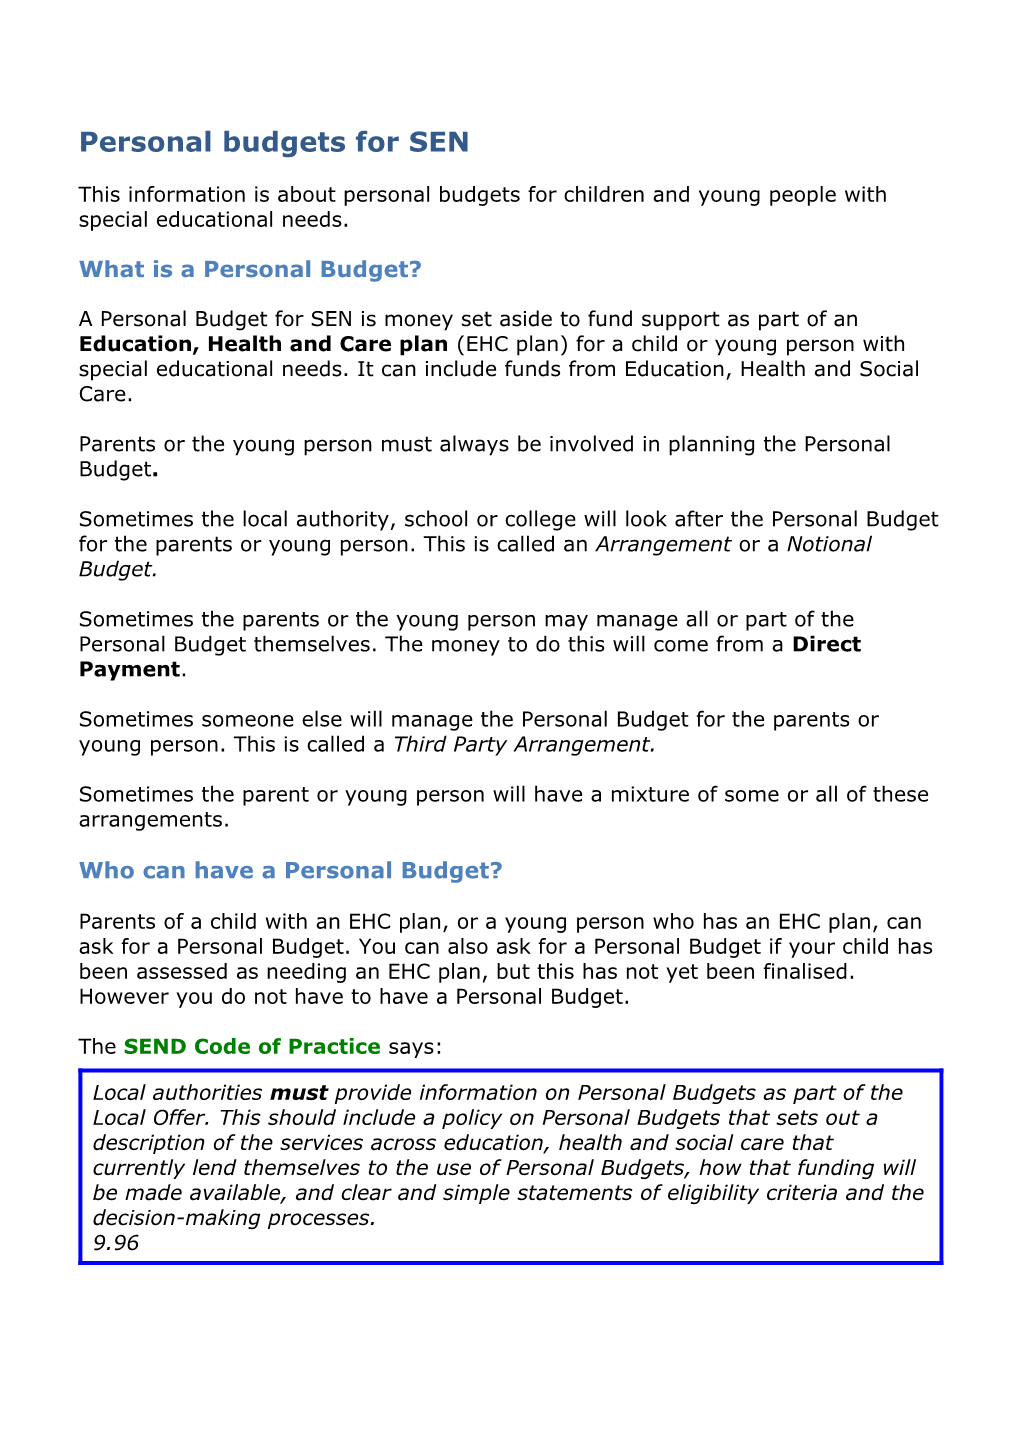 Personal Budgets for SEN